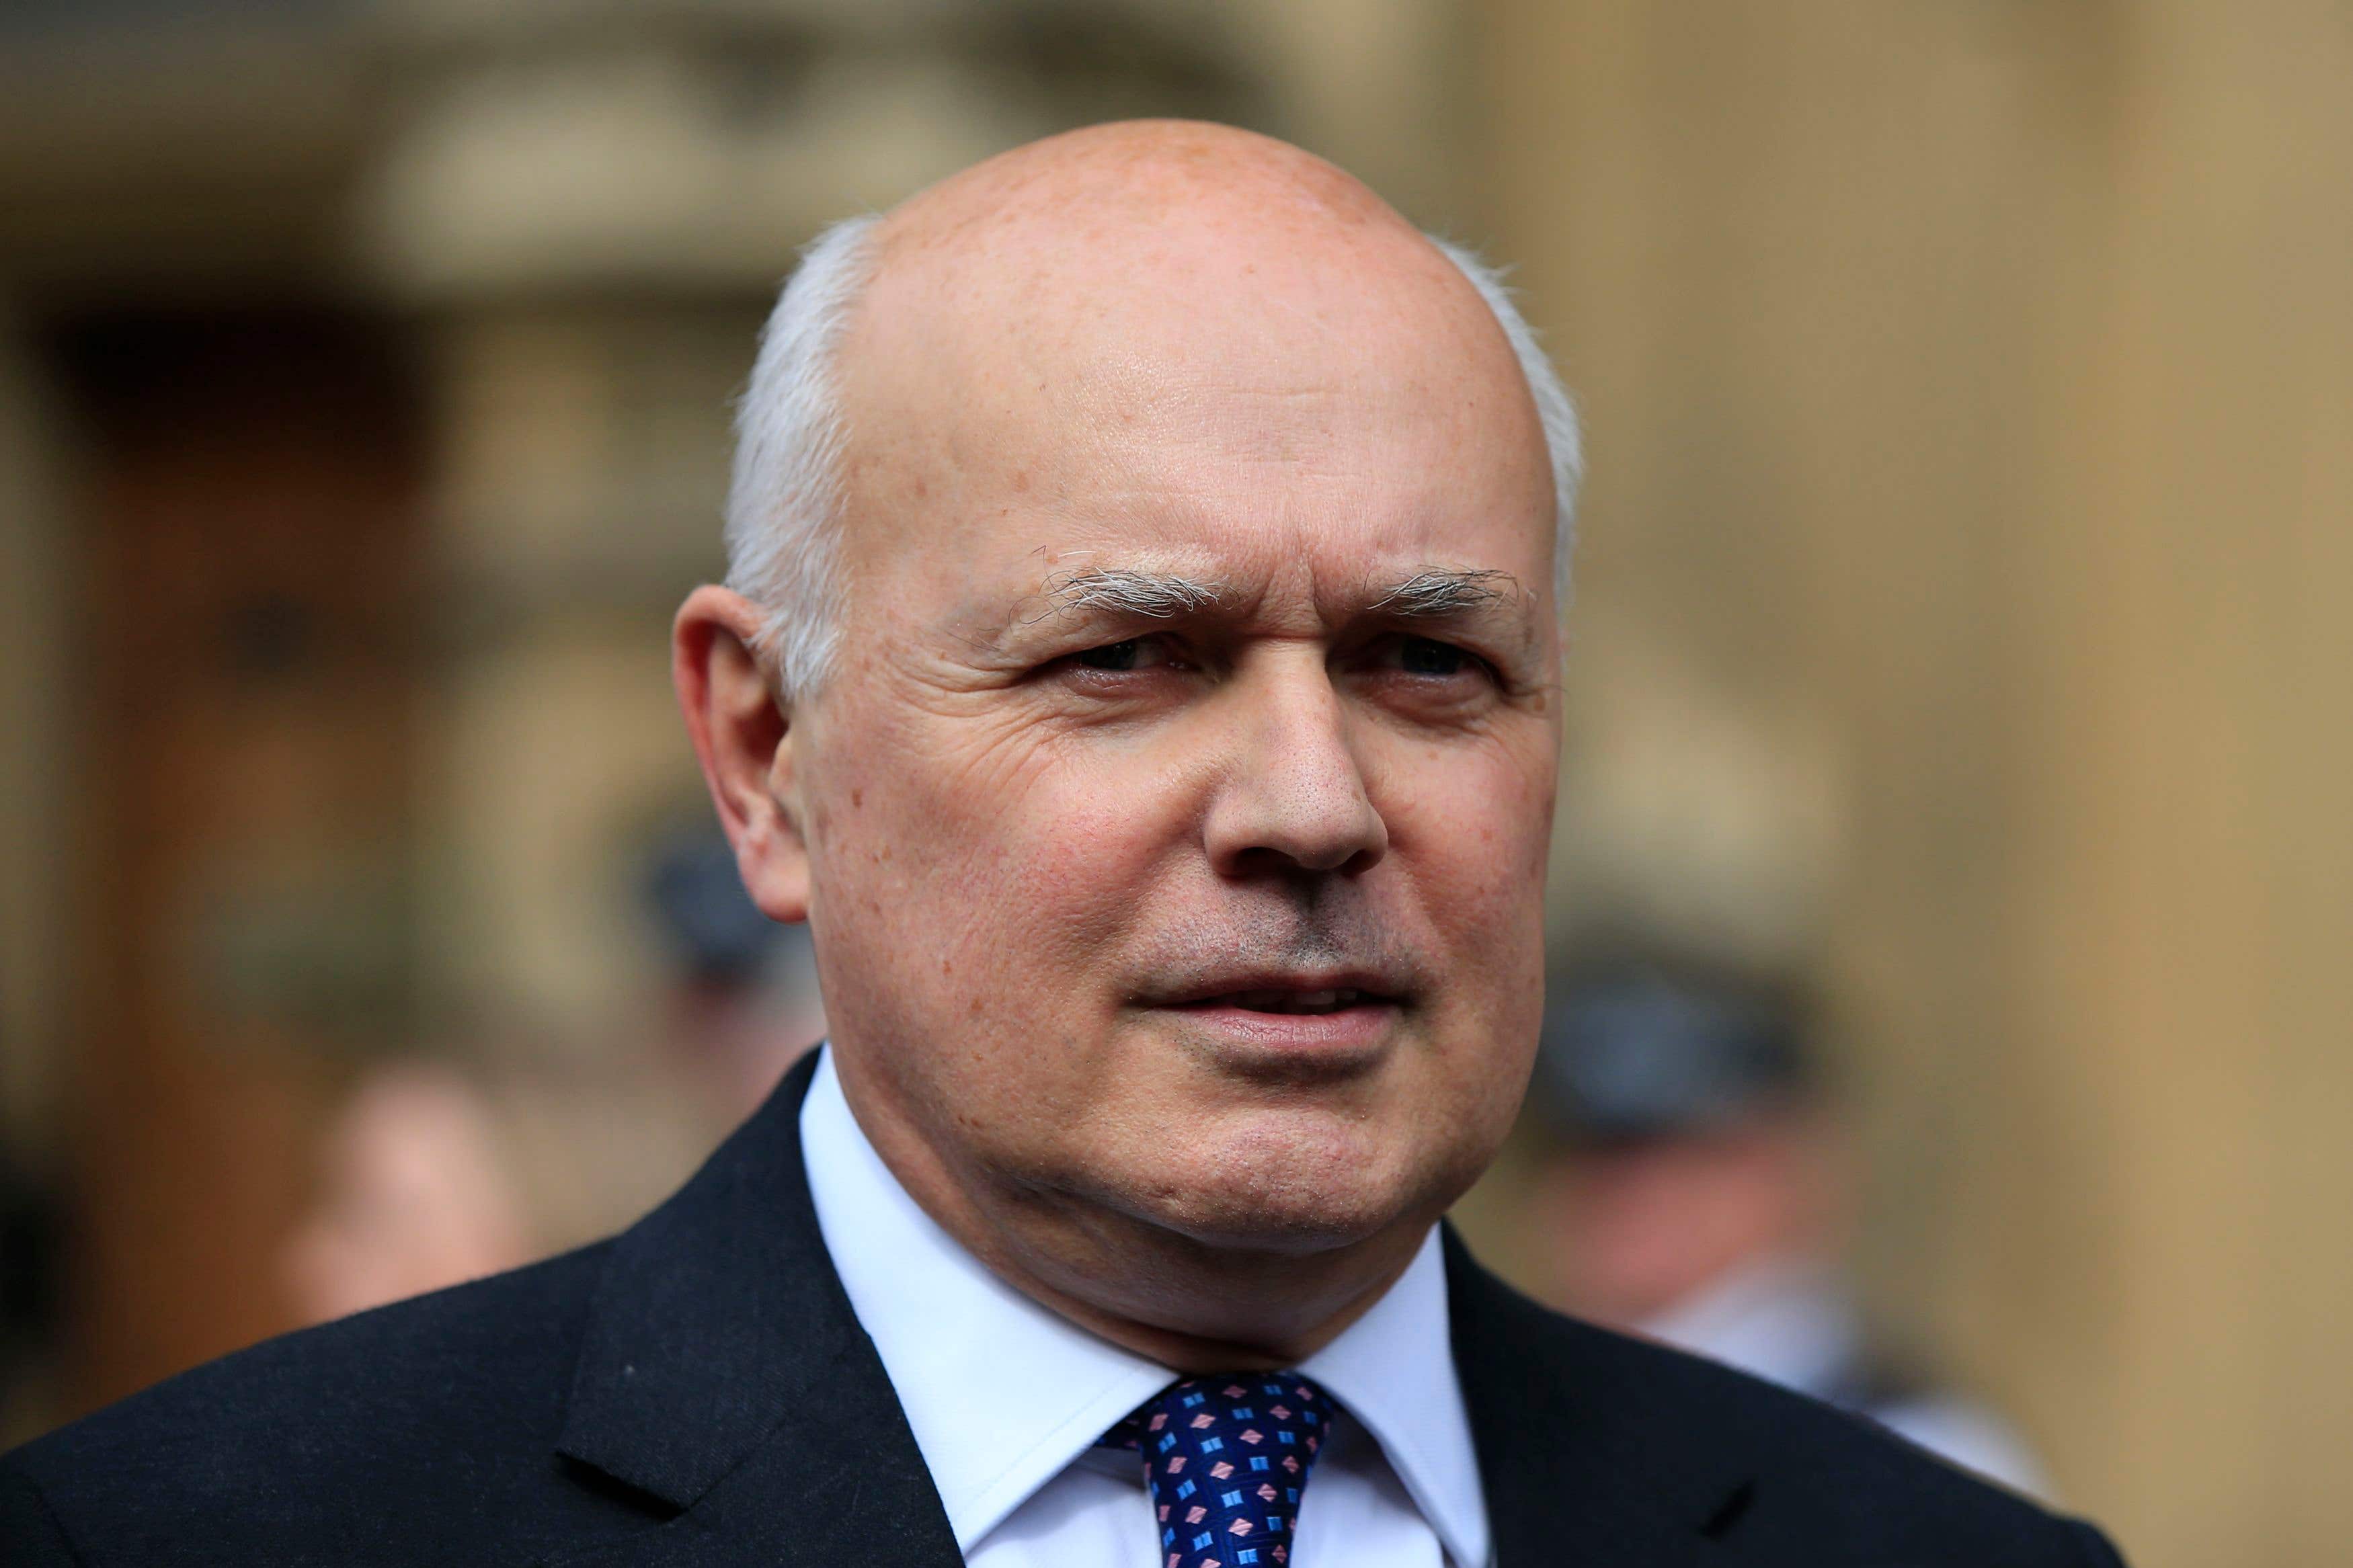 Despite voting to support the Bill, former Tory leader Sir Iain Duncan Smith said he could always rescind his backing at a later date